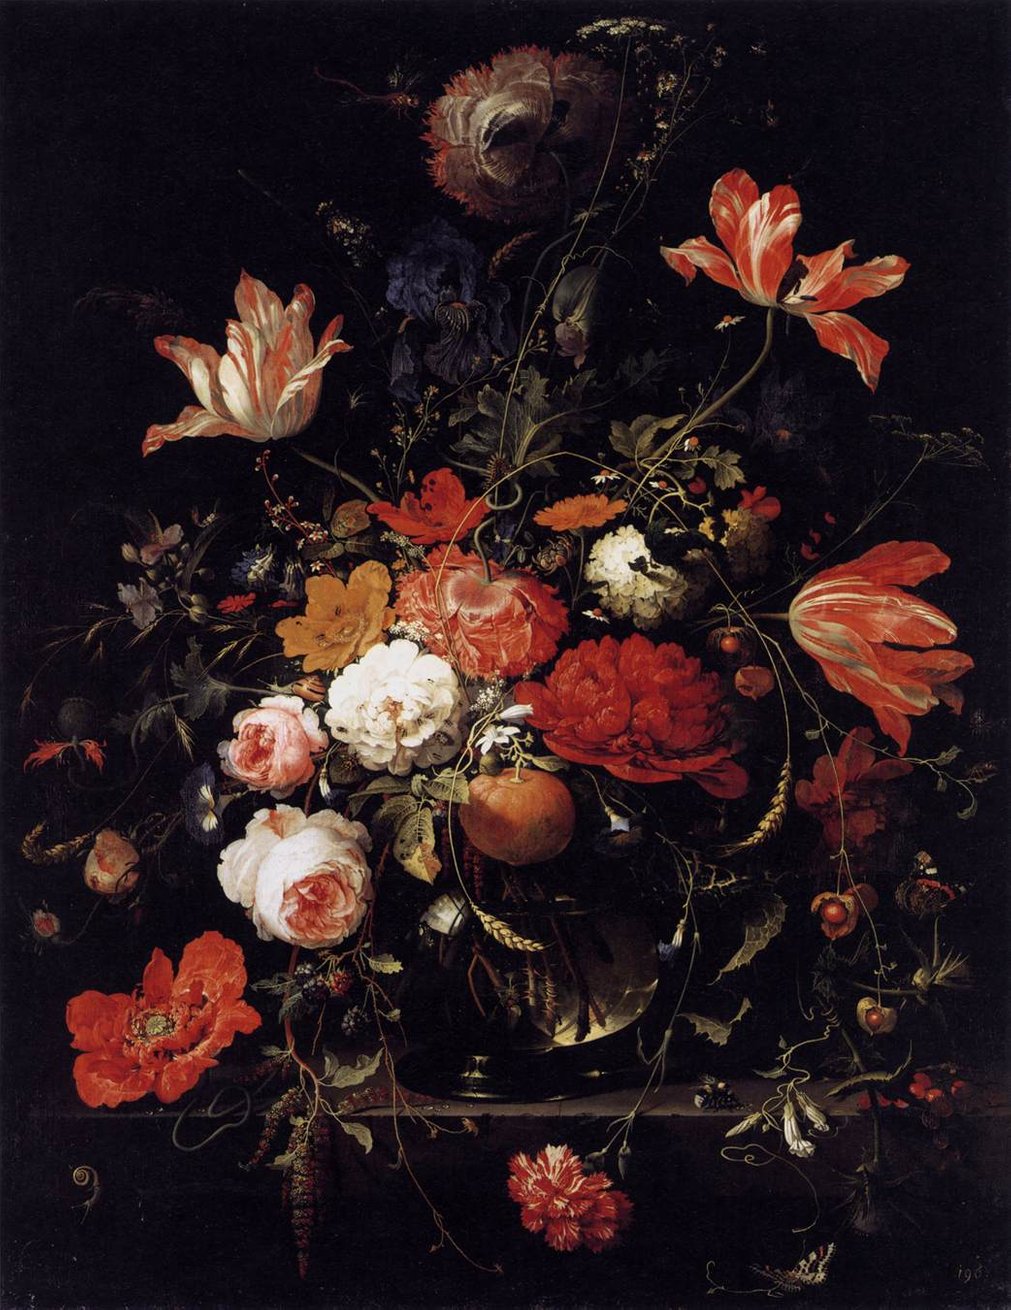 https://upload.wikimedia.org/wikipedia/commons/a/a8/Abraham_Mignon_-_A_Glass_of_Flowers_and_an_Orange_Twig_-_WGA15669.jpg